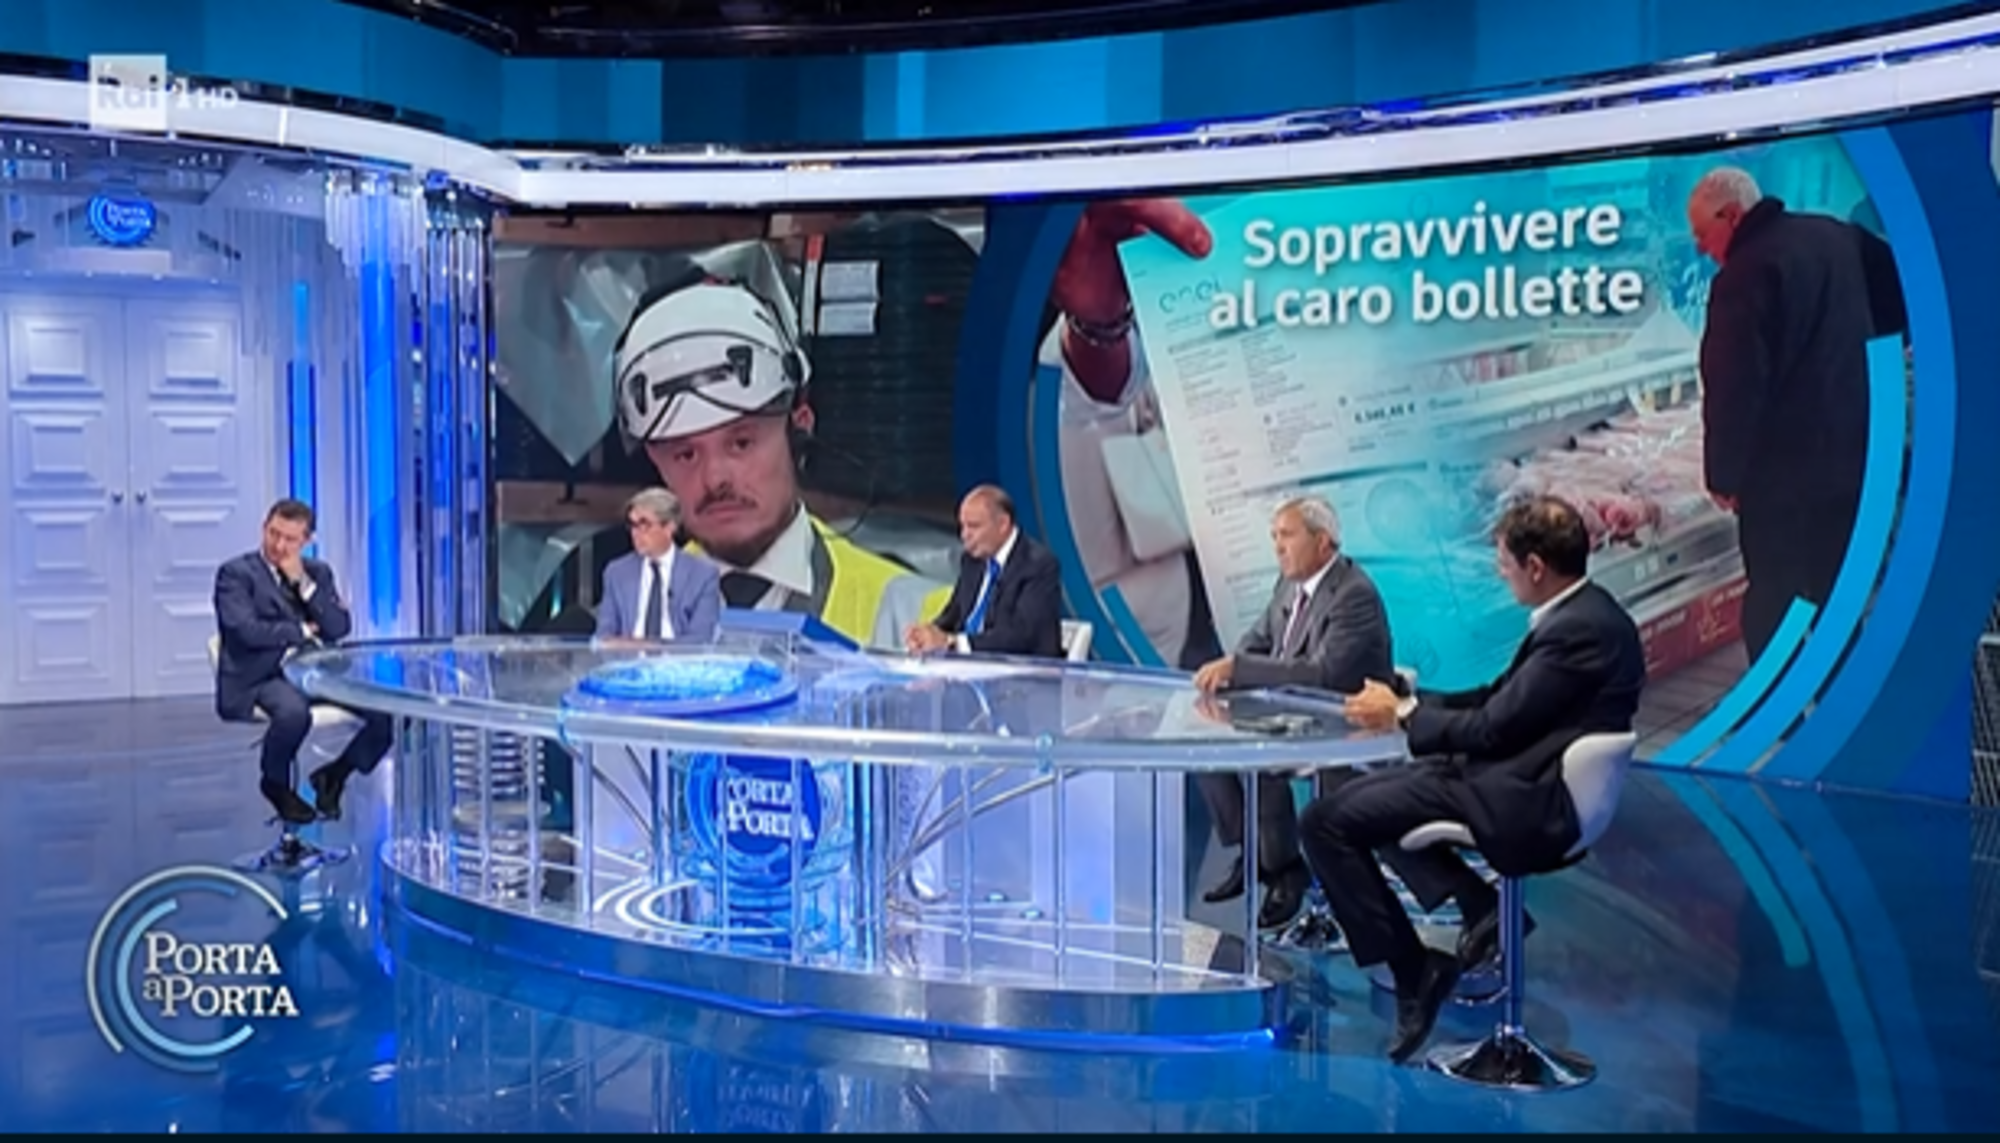 The interview with Andrea Beri during talk show "Porta a Porta" on energy crisis.